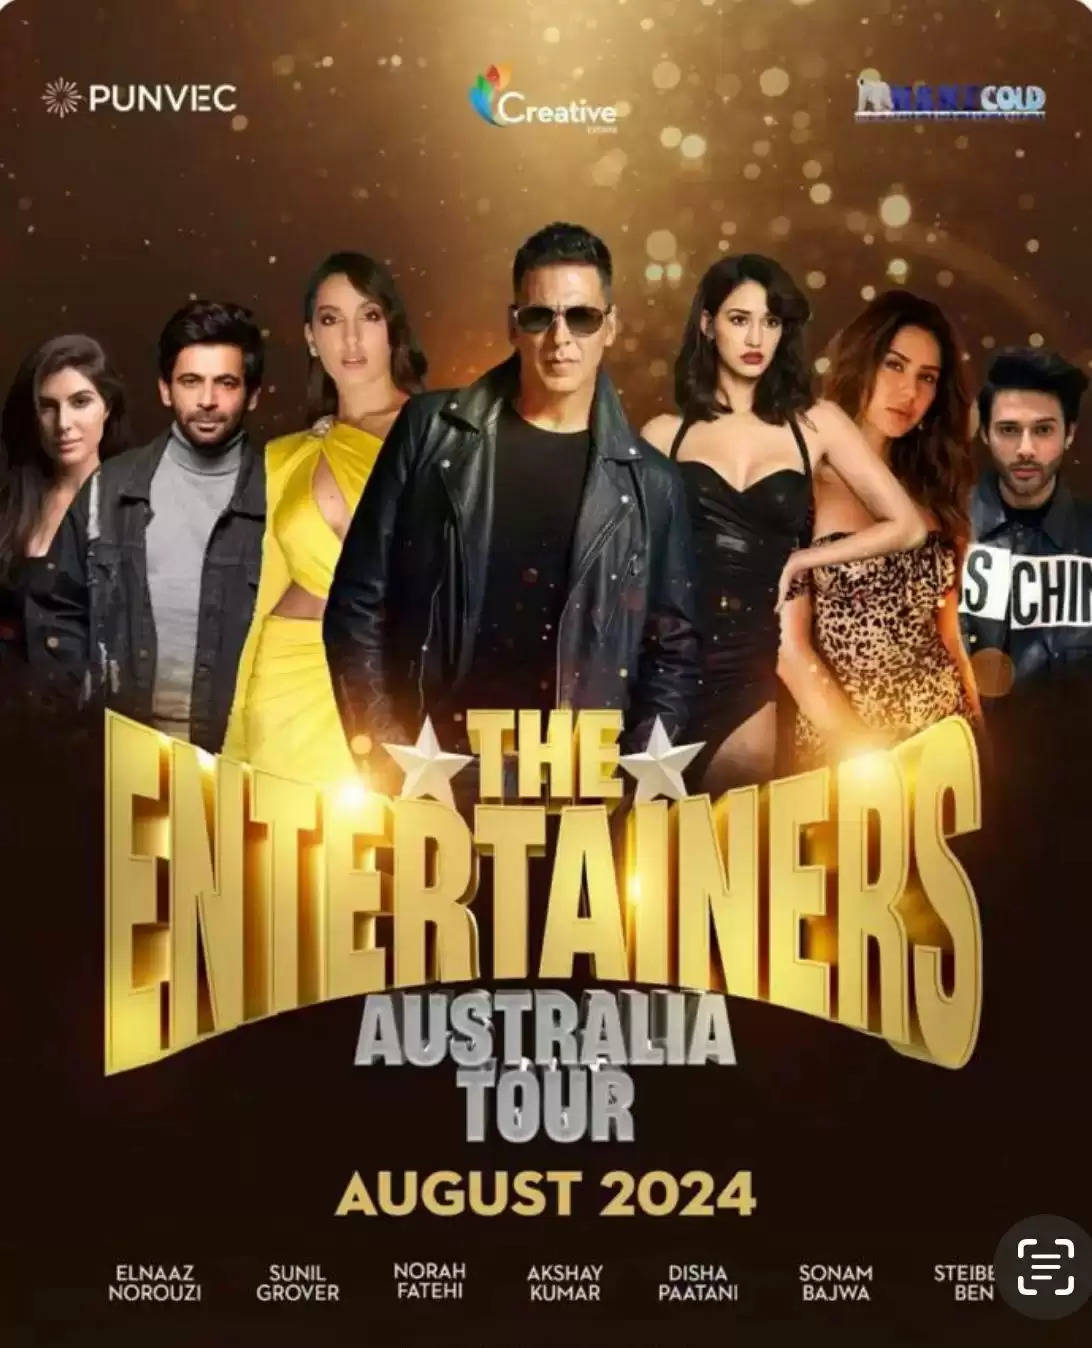 Akshay Kumar to headline The Entertainers Tour in August 2024, this year in Australia